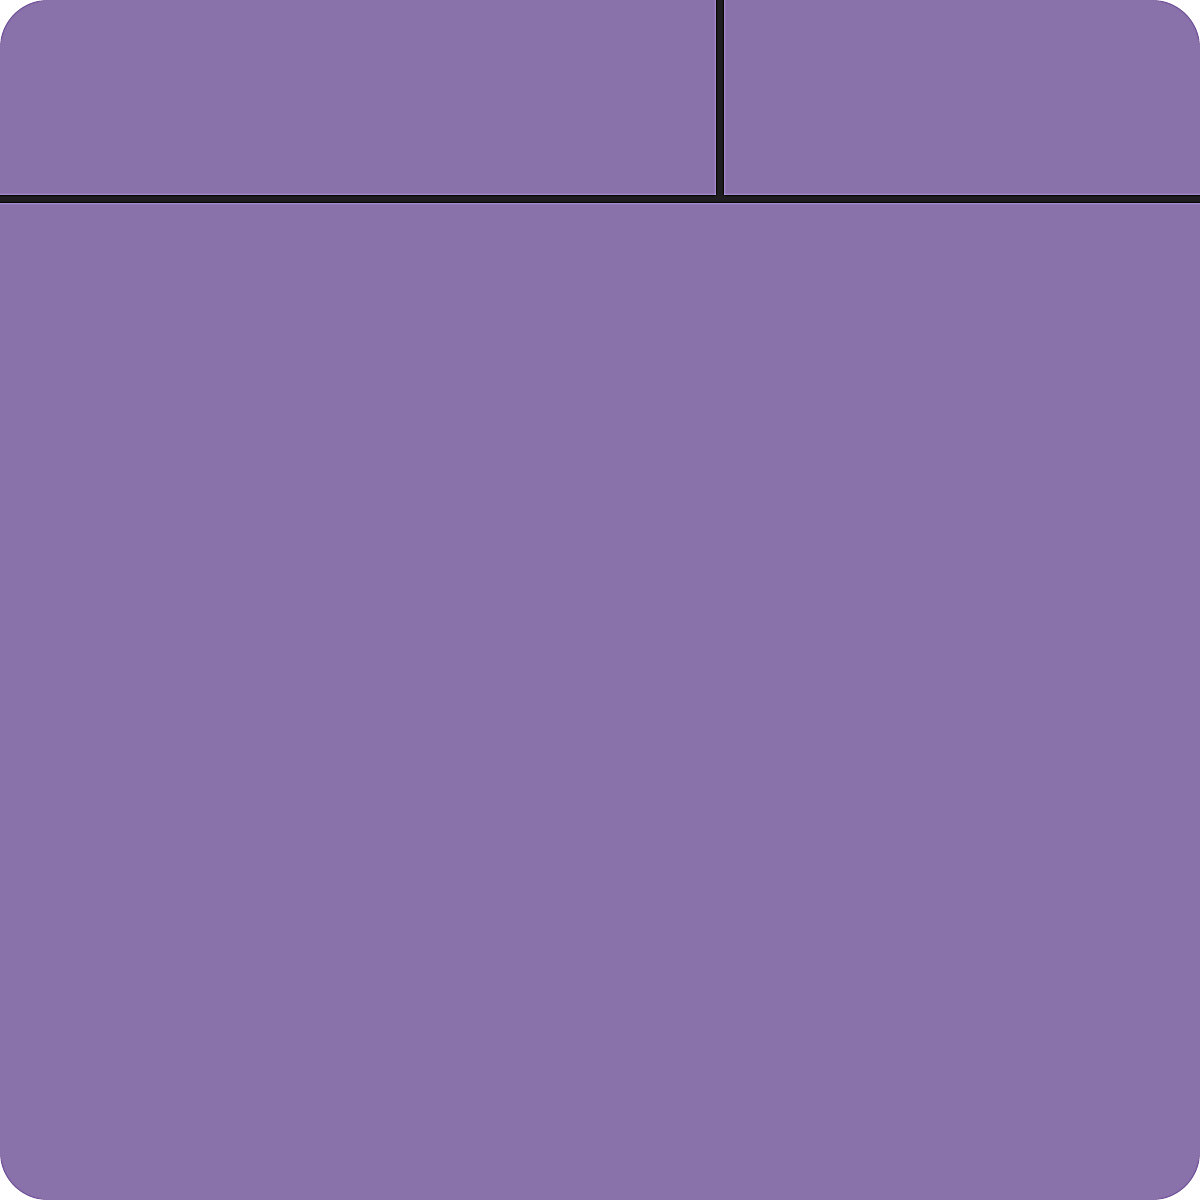 Post-it notes, magnetic, LxW 75 x 75 mm, pack of 10, violet-8